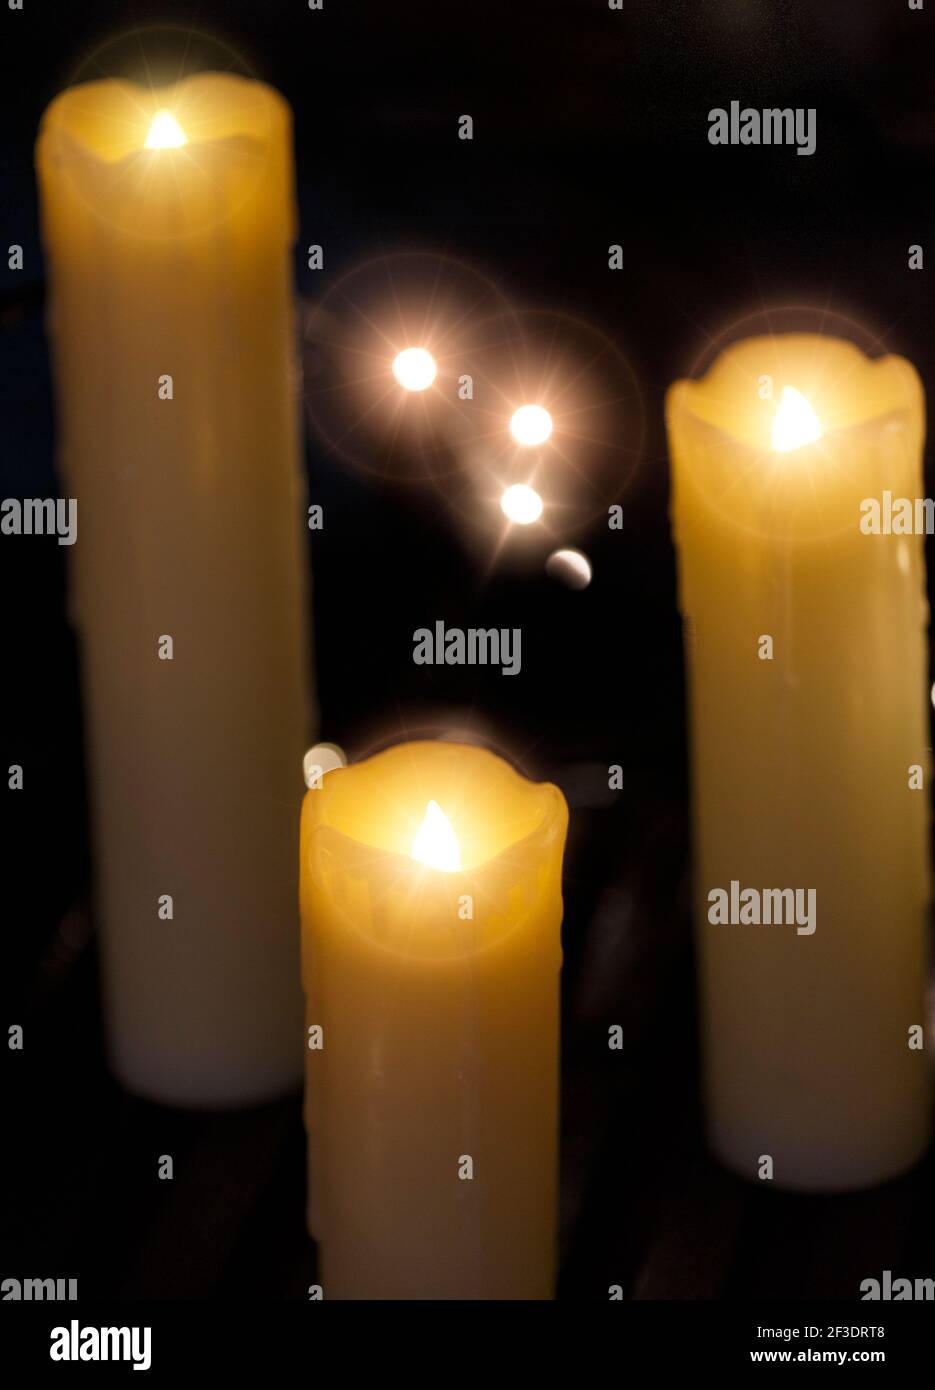 Traditional Christmas and event celebration decorations in the form of artificial illuminated candles. Stock Photo